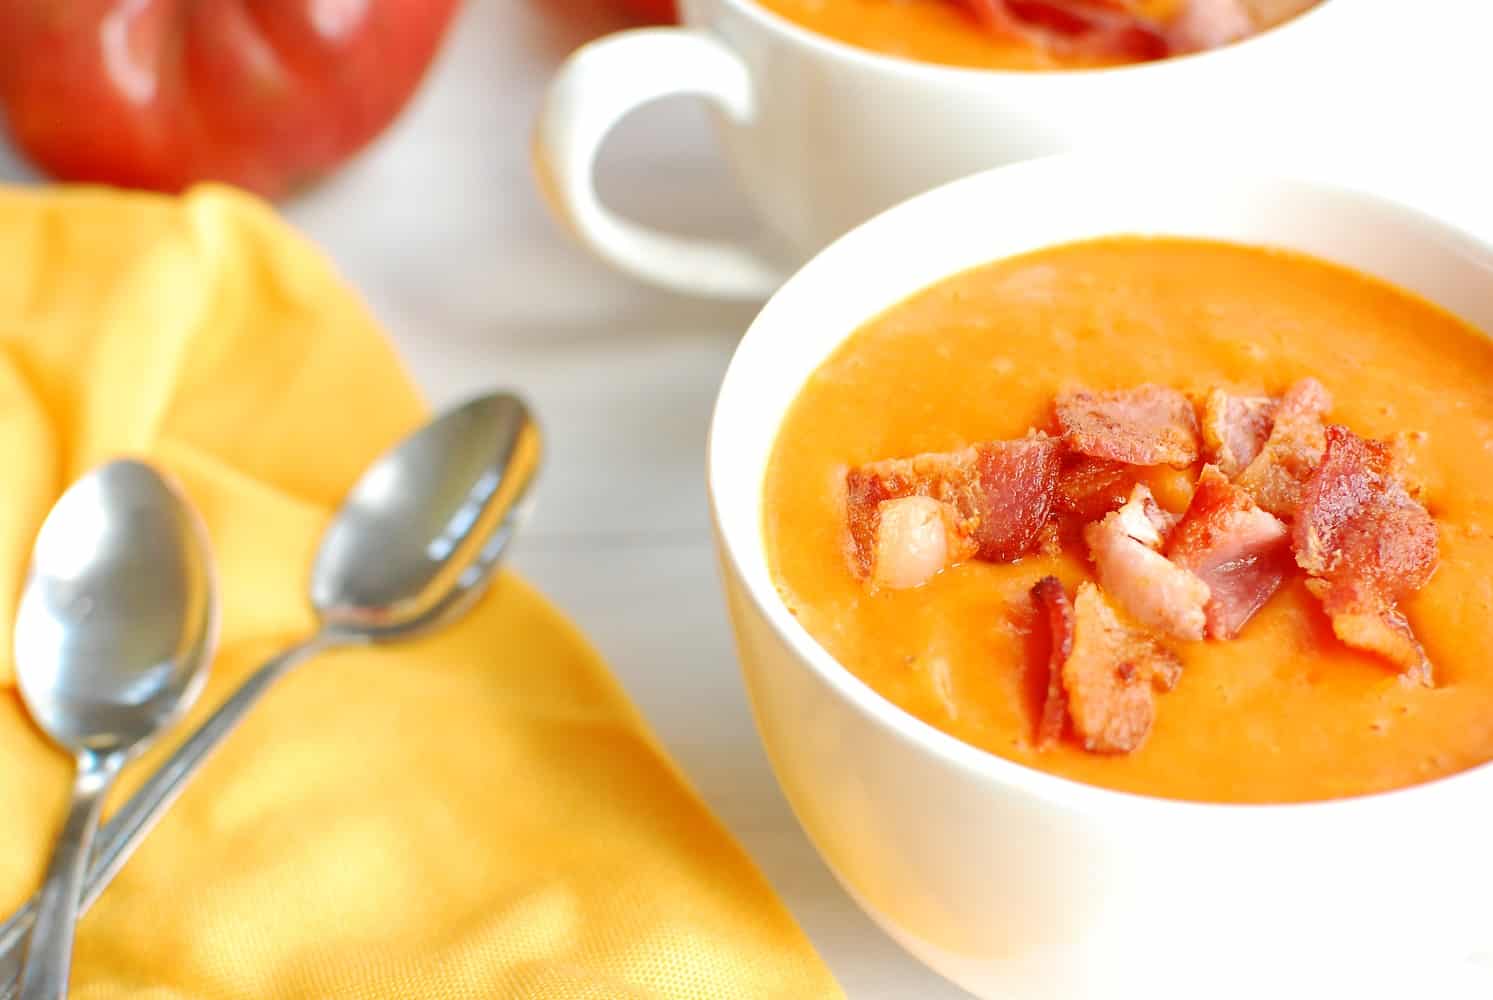 Dairy Free Gluten Free Tomato Soup - Dairy Free for Baby